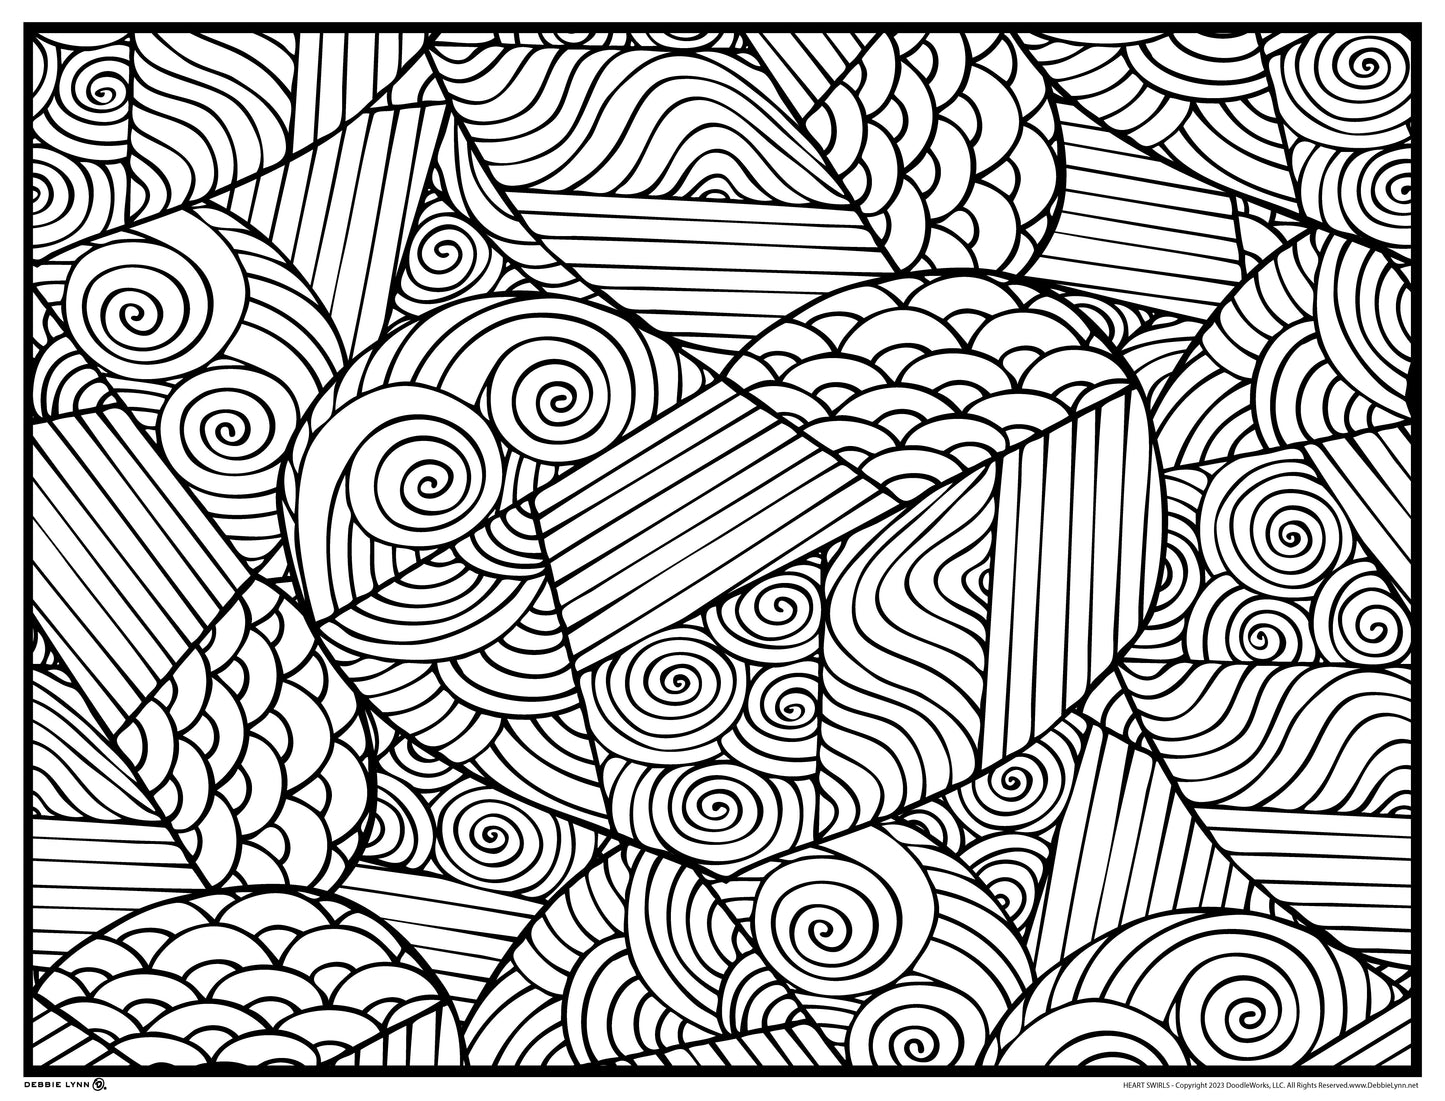 Heart Swirls Valentines Day Personalized Giant Coloring Poster 46"x60"